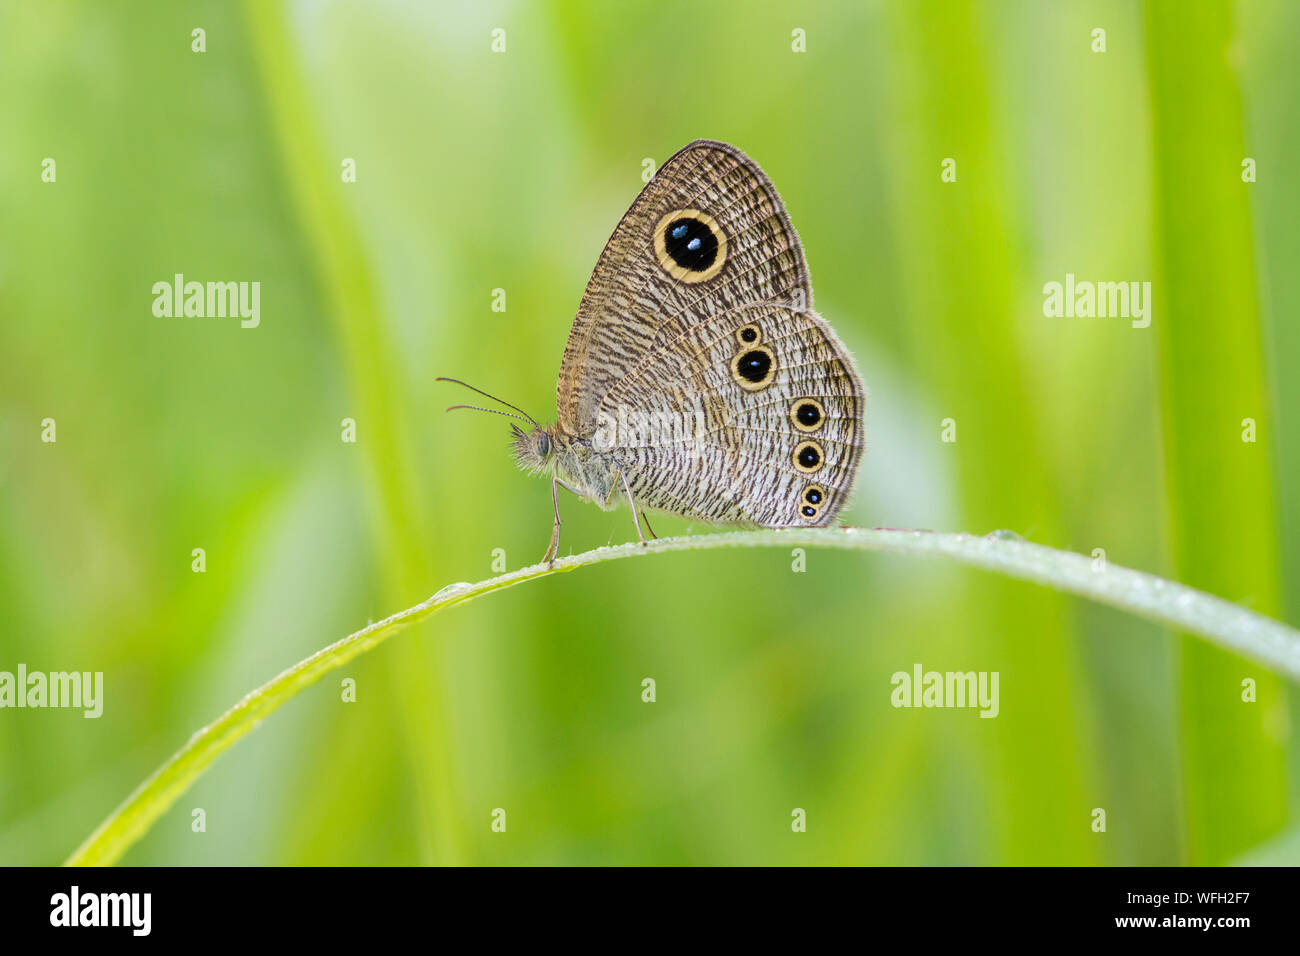 Butterfly on a plant, Indonesia Stock Photo